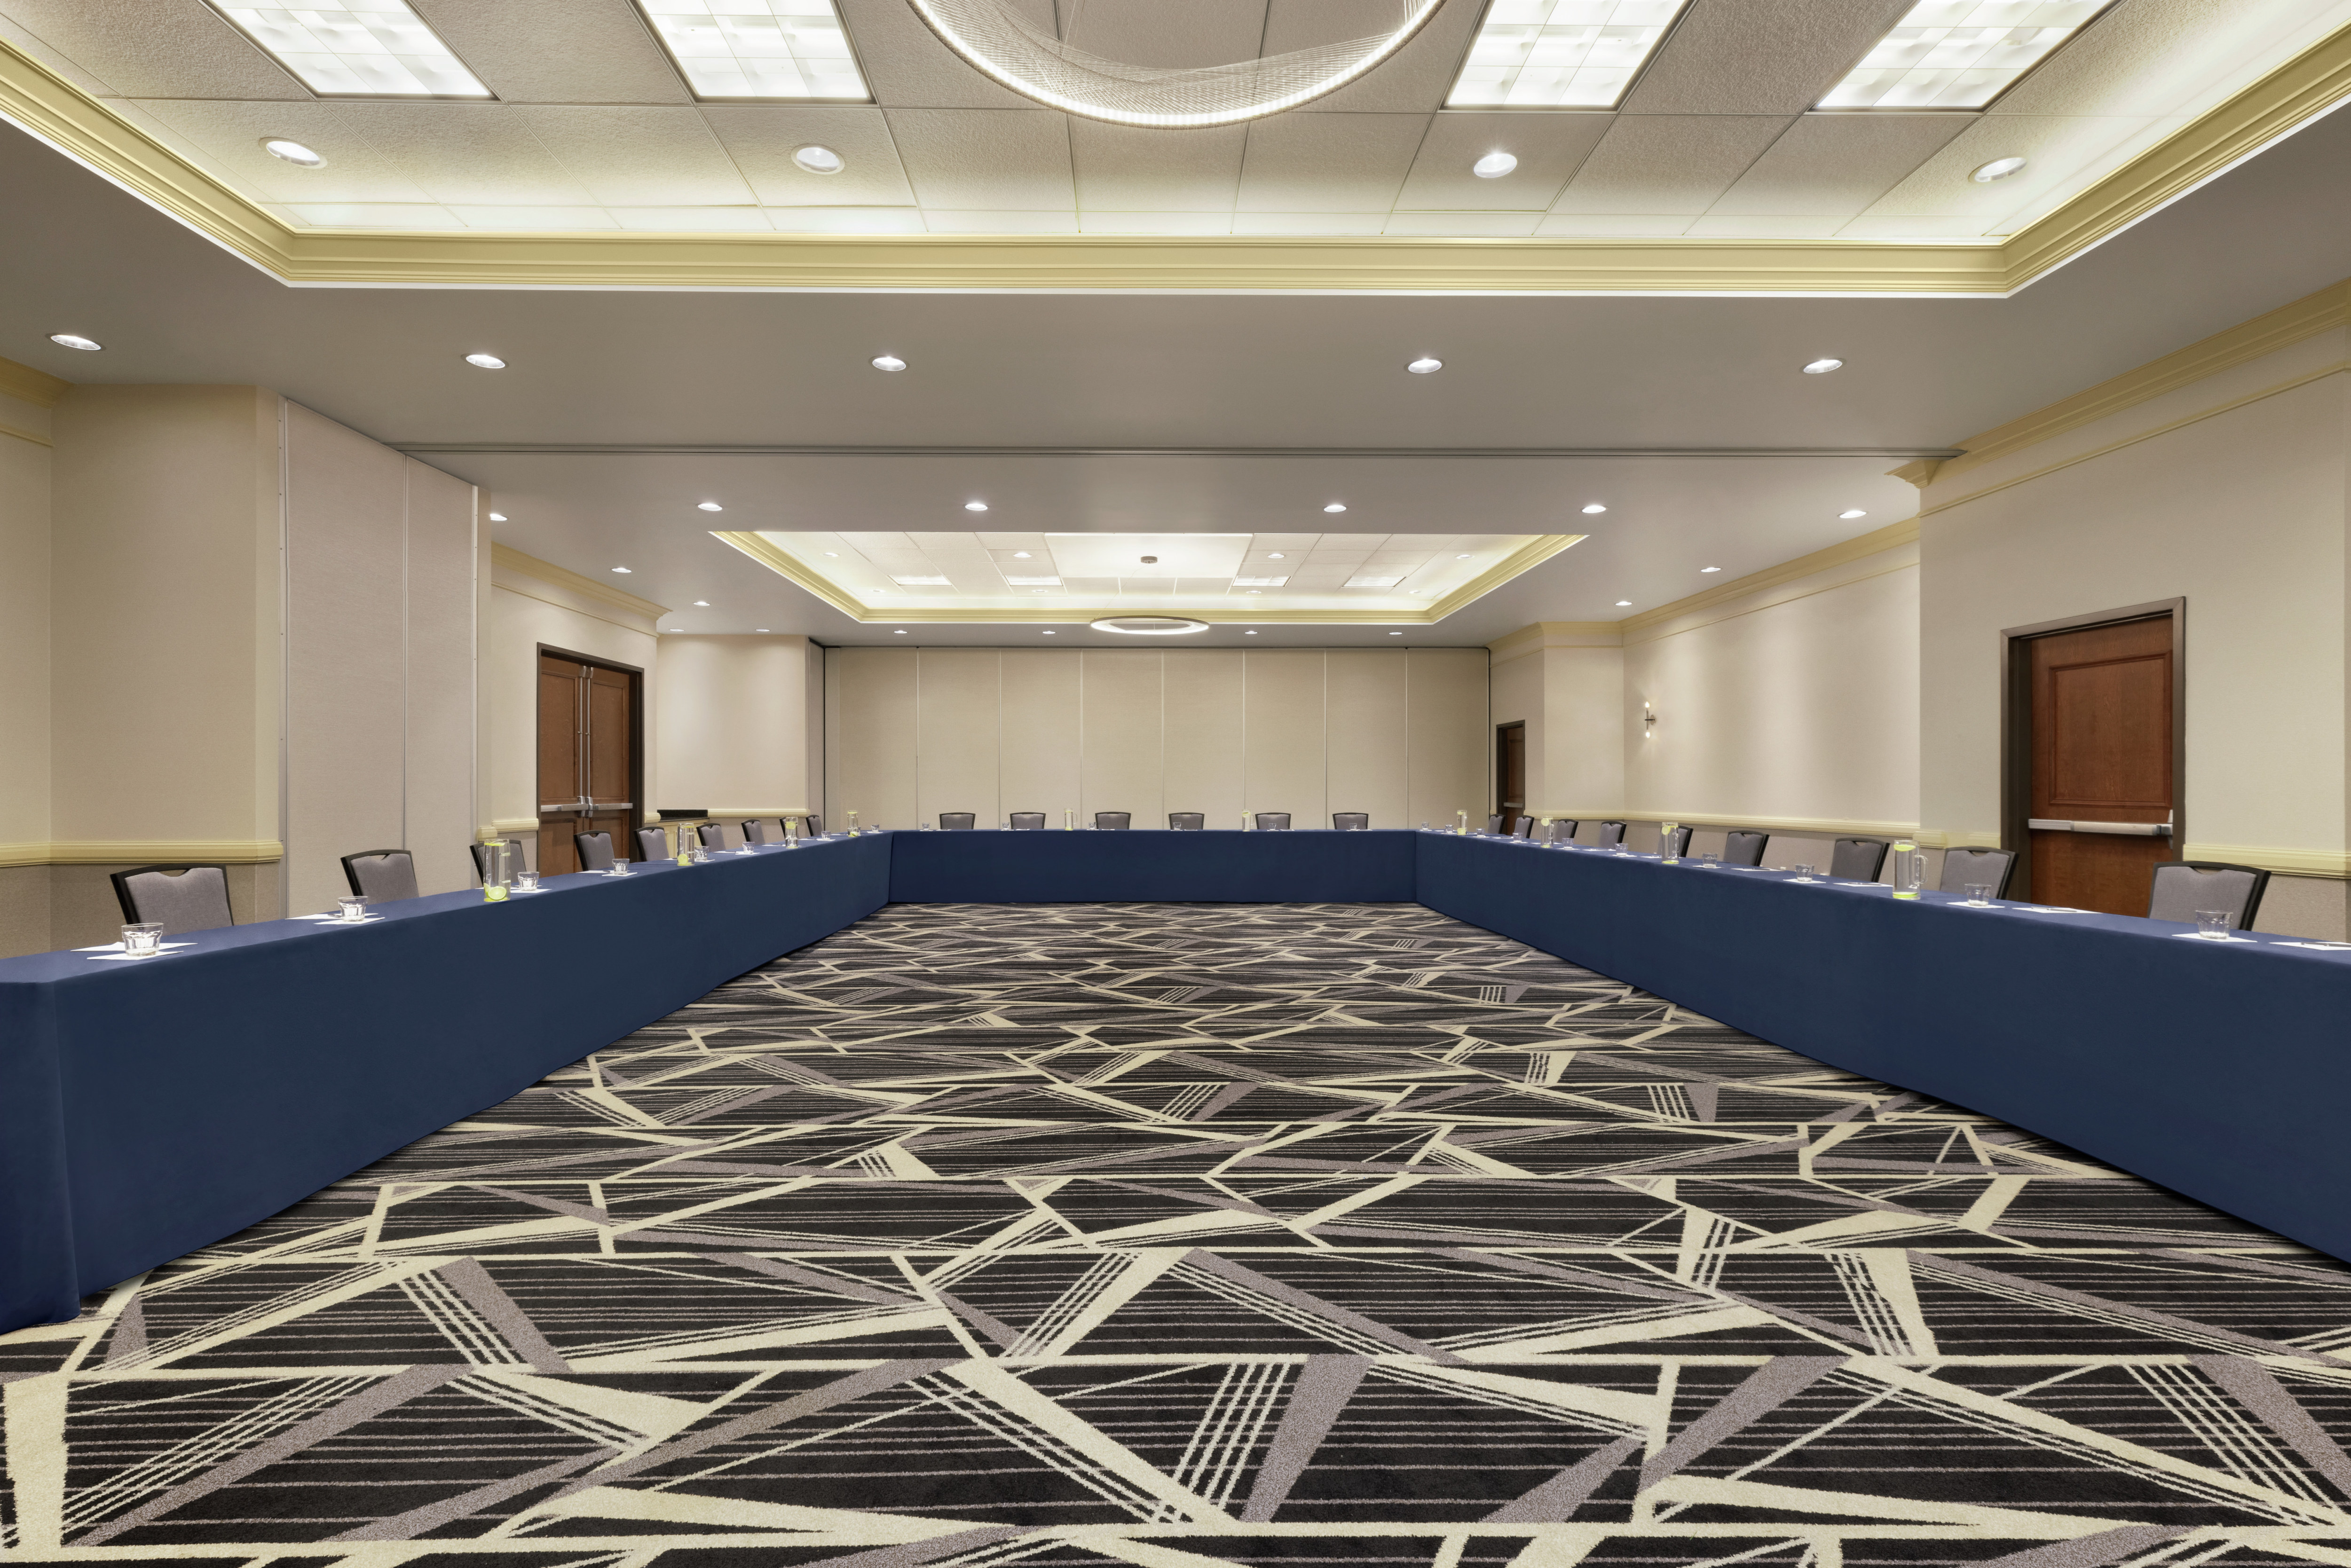 Spacious on-site bathroom fully equipped with large u-shape conference setup for corporate events and functions.